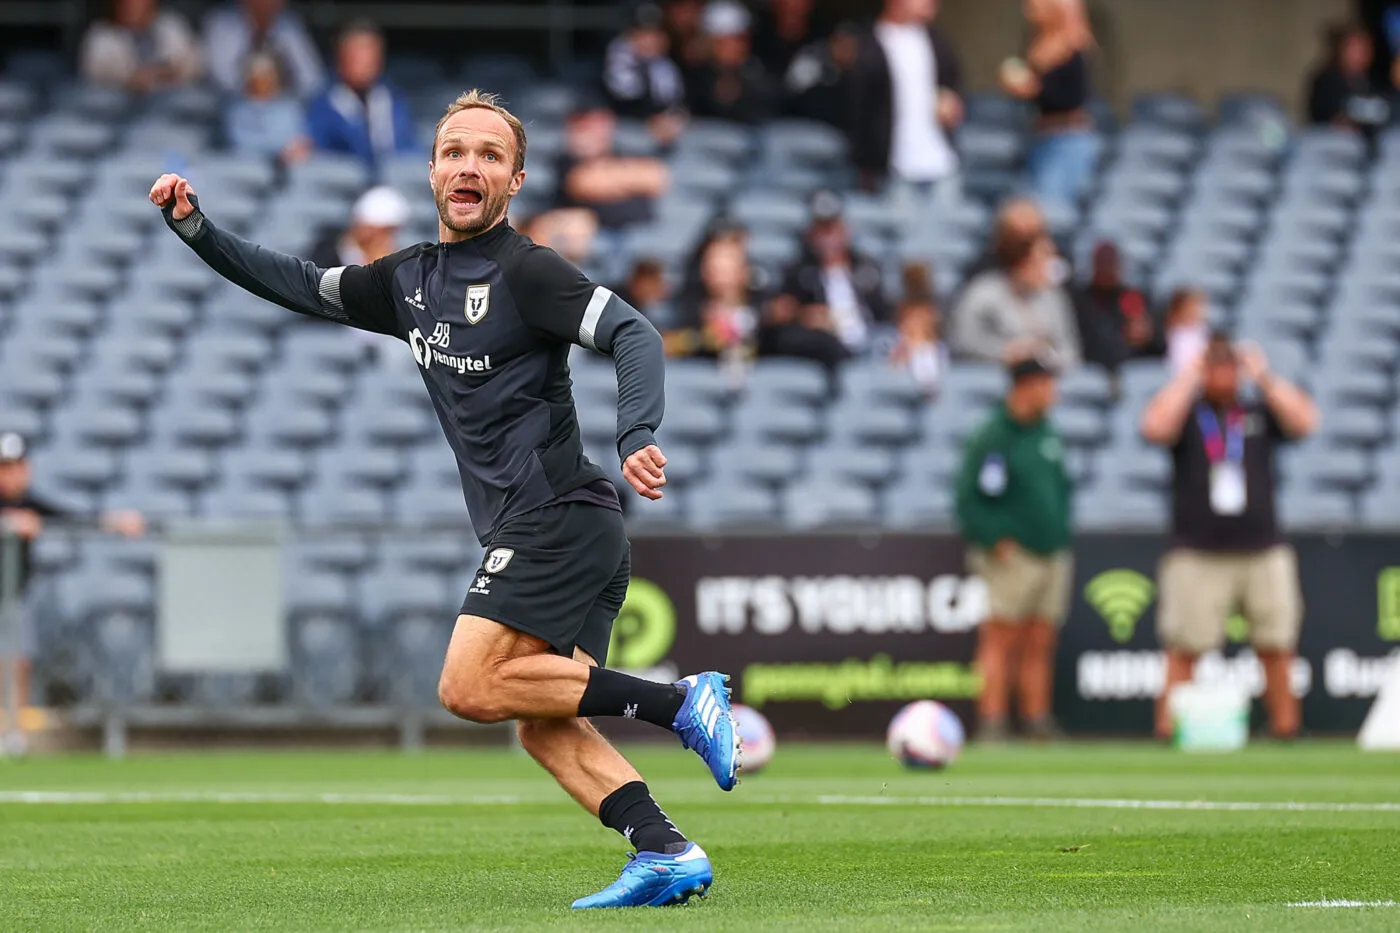 4th November 2023; Campbelltown Stadium, Sydney, NSW, Australia: A-League Football, Macarthur FC versus Western United; Valere Germain of Macarthur FC during the pre game warm up drills - Photo by Icon sport